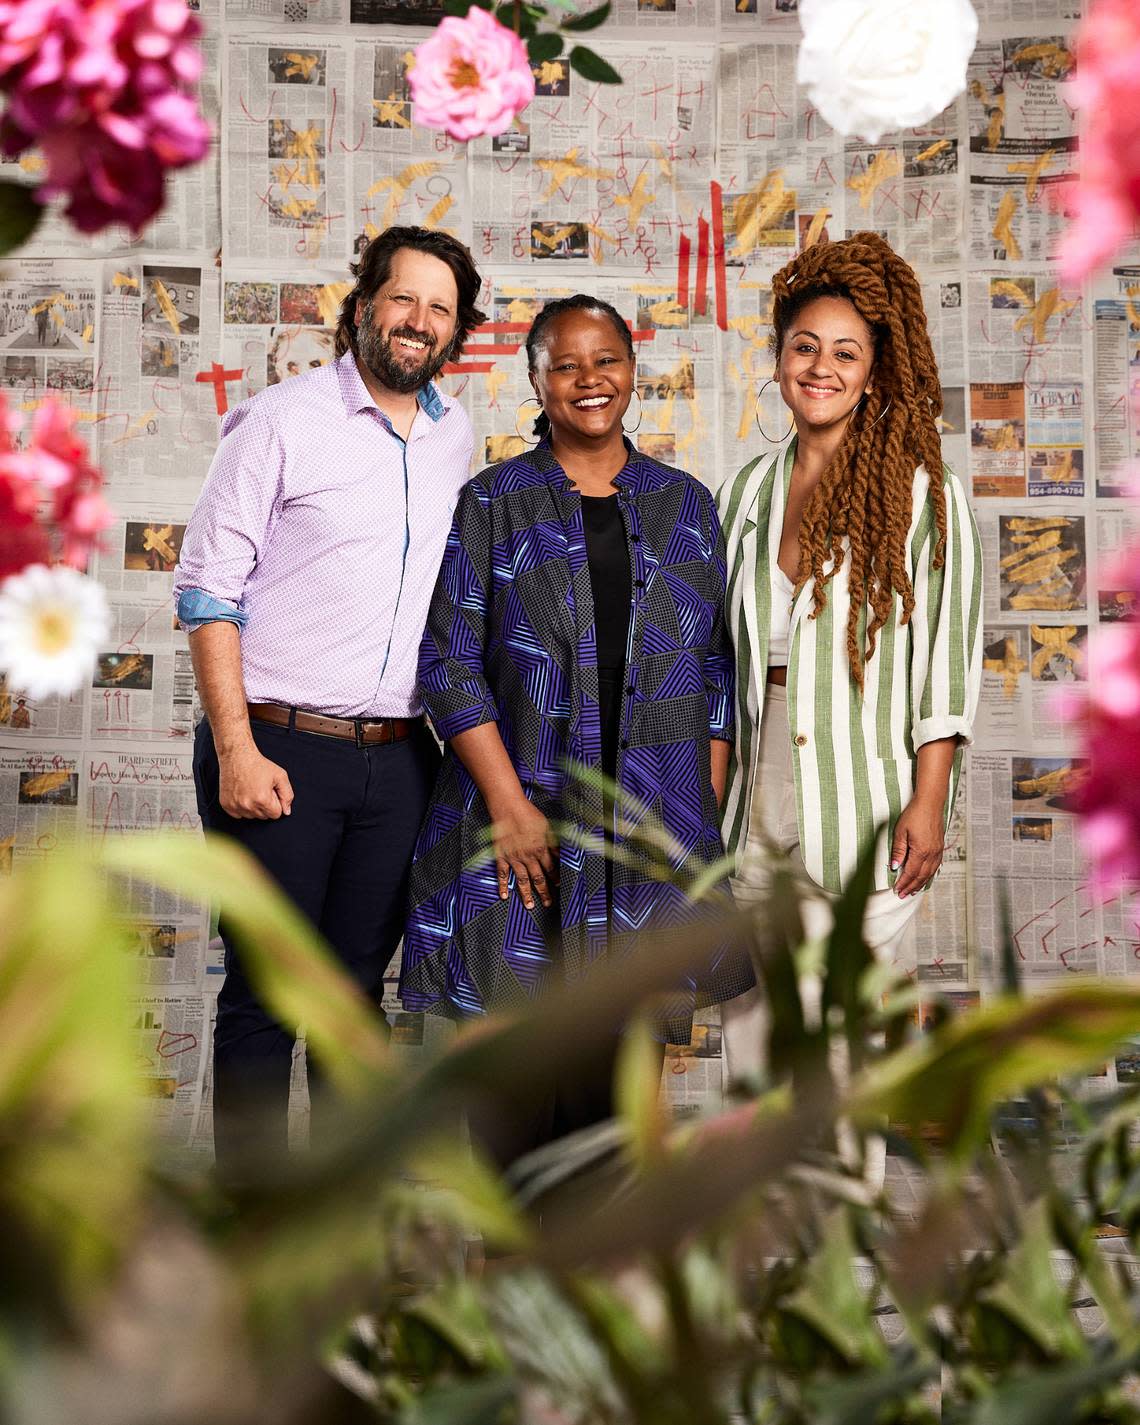 Miami New Drama’s Michel Hausmann, author Edwidge Danticat and writer-director Lileana Blain-Cruz joined forces to bring “Create Dangerously” to the stage, opening in previews Thursday, May 4 and running at the Colony Theater, Miami Beach, through Sunday, May 28. (Photo courtesy of FURIOSA Productions)